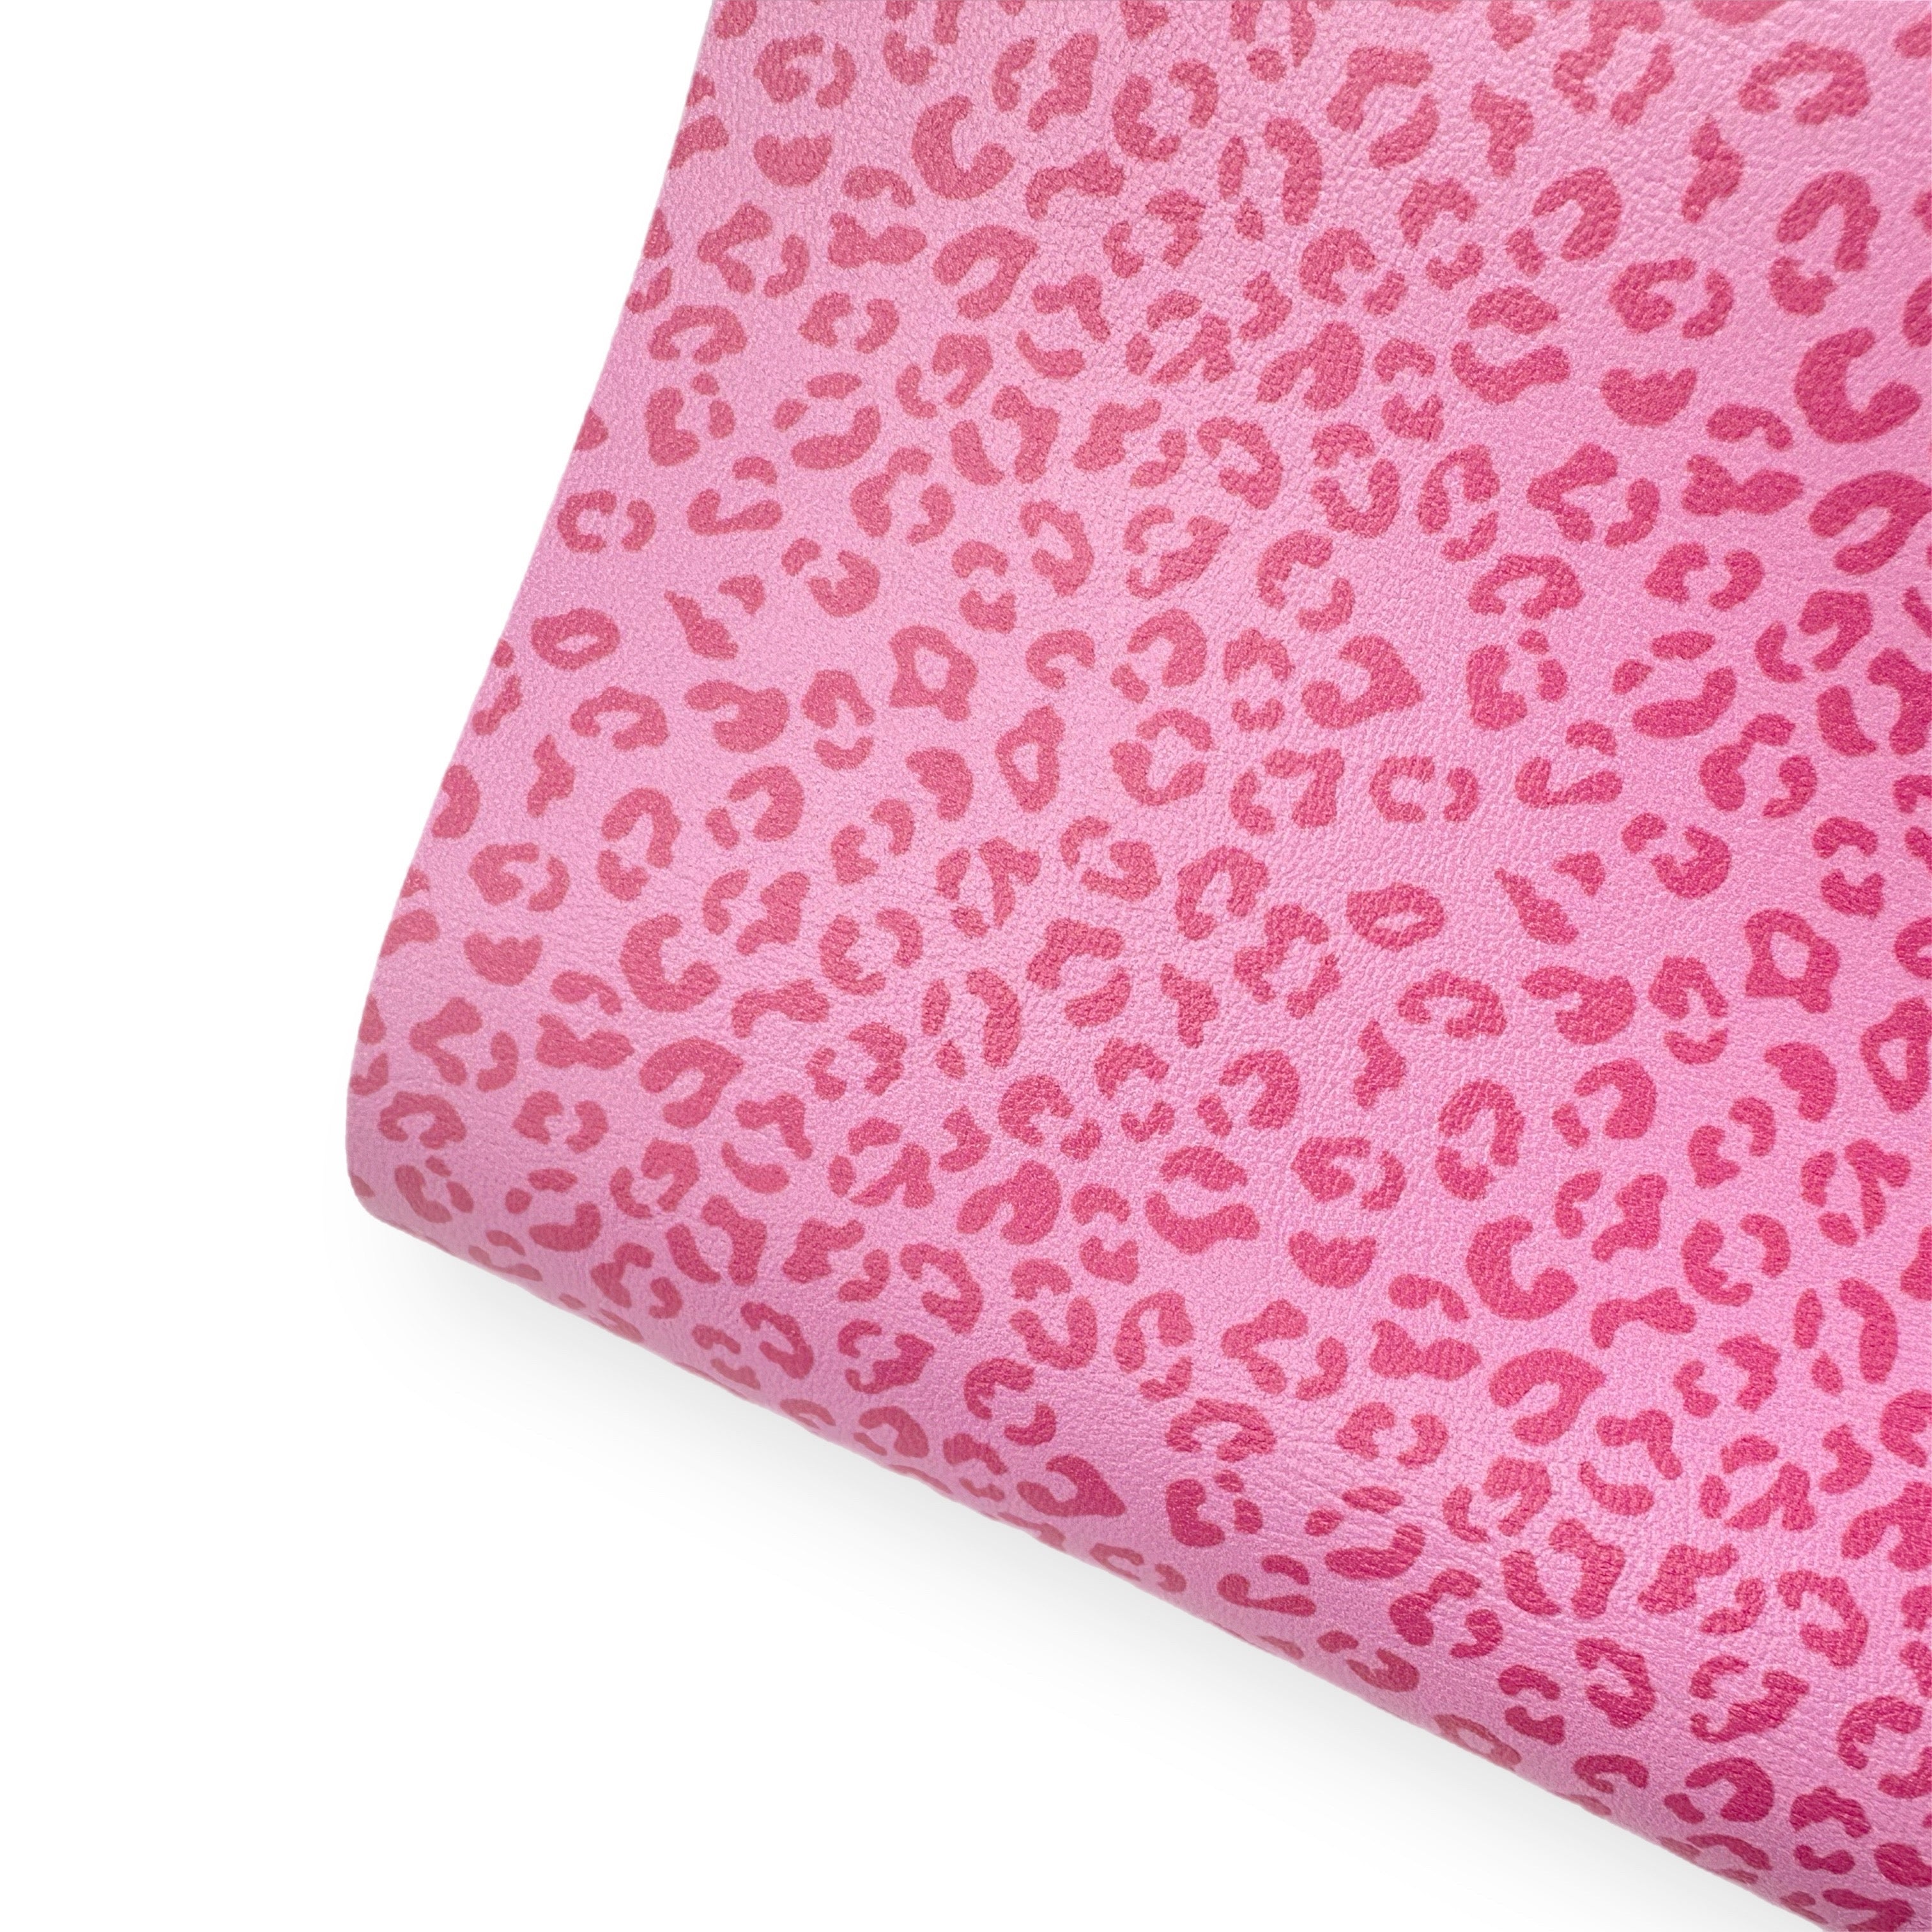 It’s all over Pink Leopard Premium Faux Leather Fabric